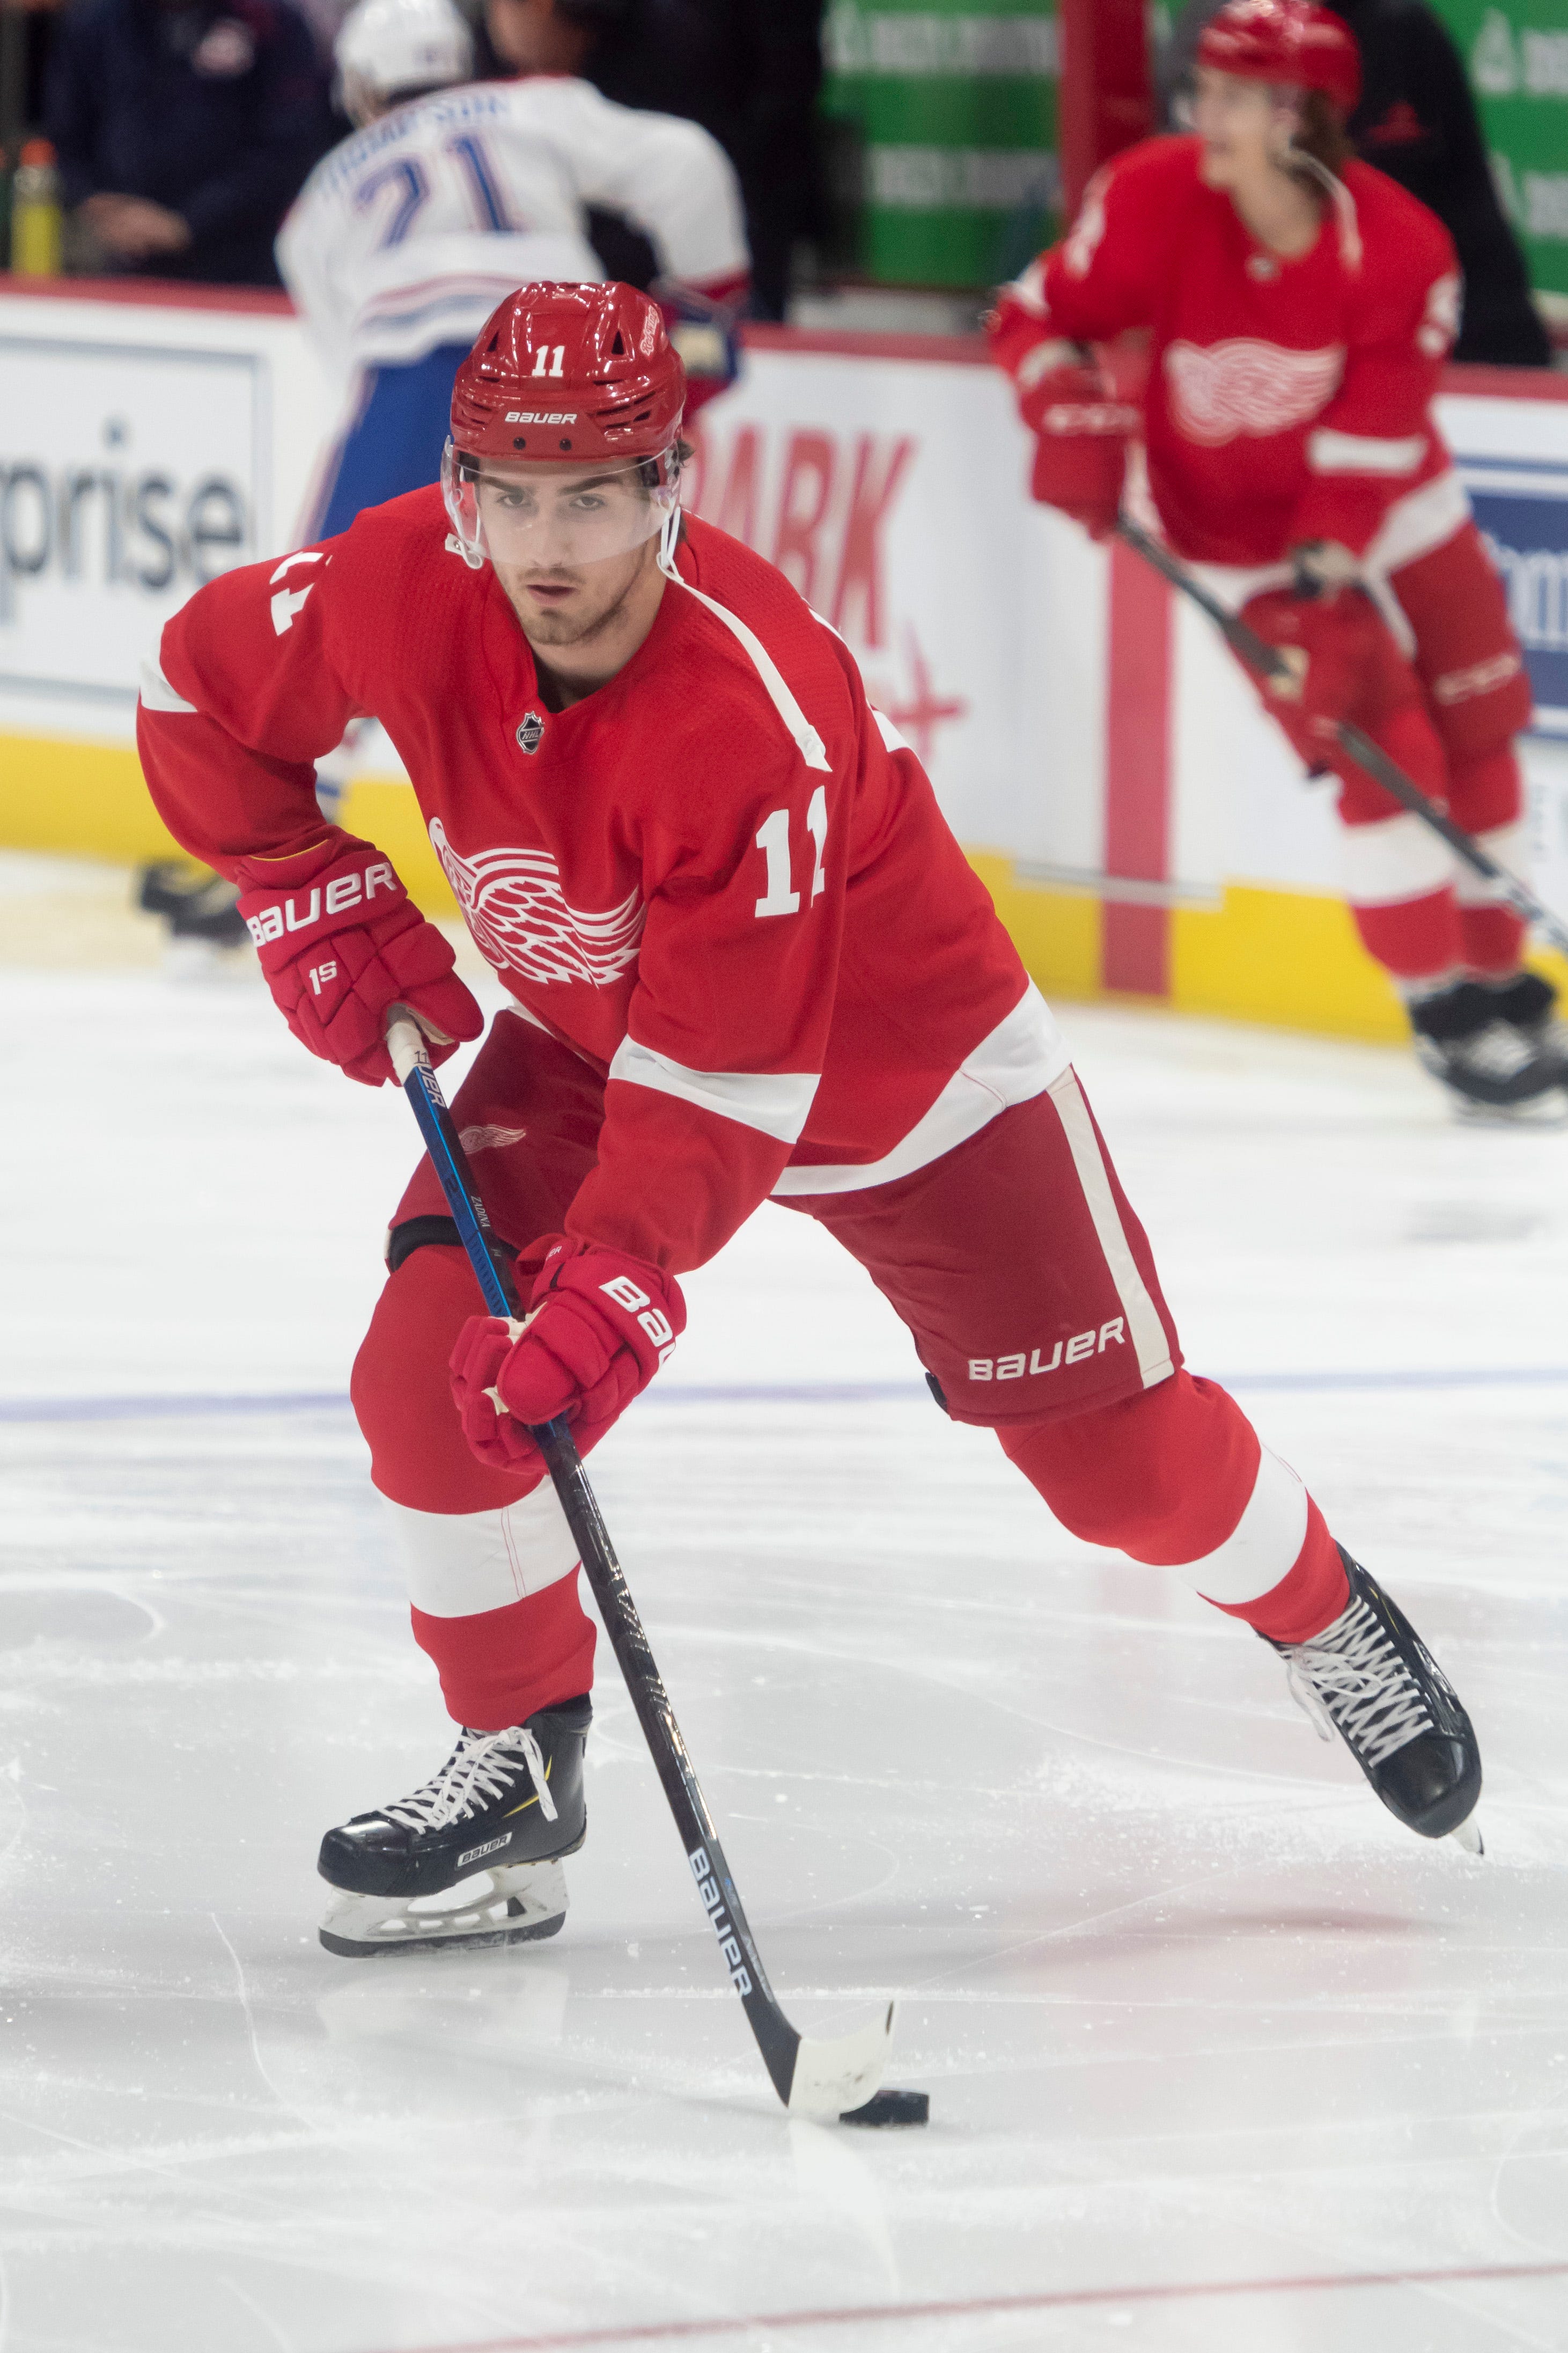 3. Filip Zadina, right wing. The hype and expectations after Zadina was drafted last June were excessive and, at least initially, unrealistic. Zadina wasn’t ready for the NHL last October, but inched closer as the regular season went on. He had three points (one goal) in a nine-game look-see in early March. Zadina’s potential and game-breaking ability make him an elite prospect, a valuable commodity going forward.